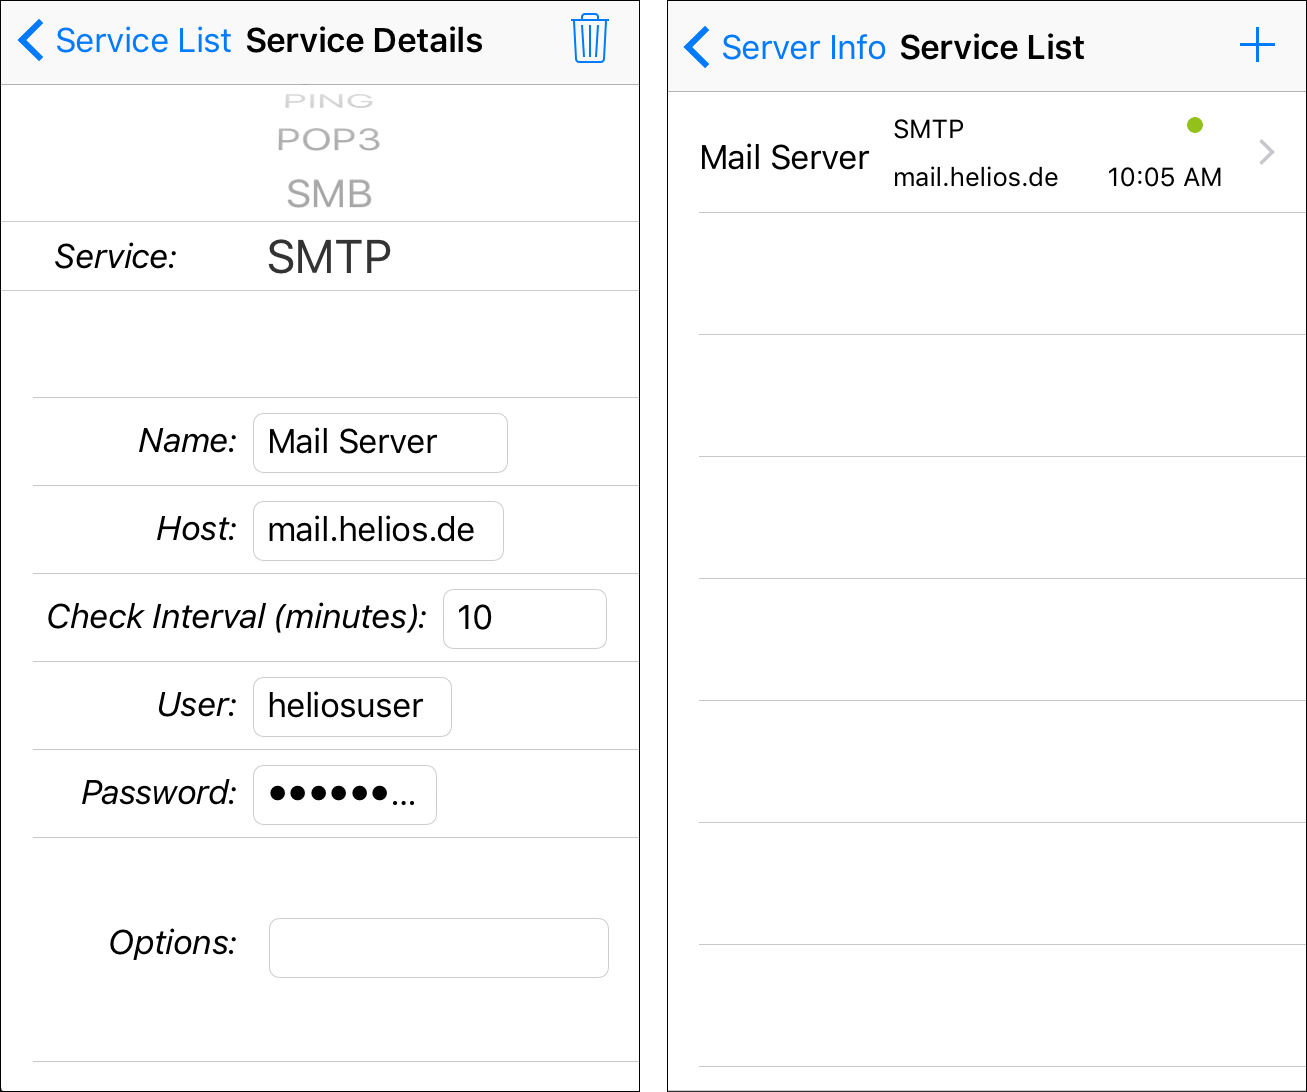 Entering mail server data
and displaying the new service